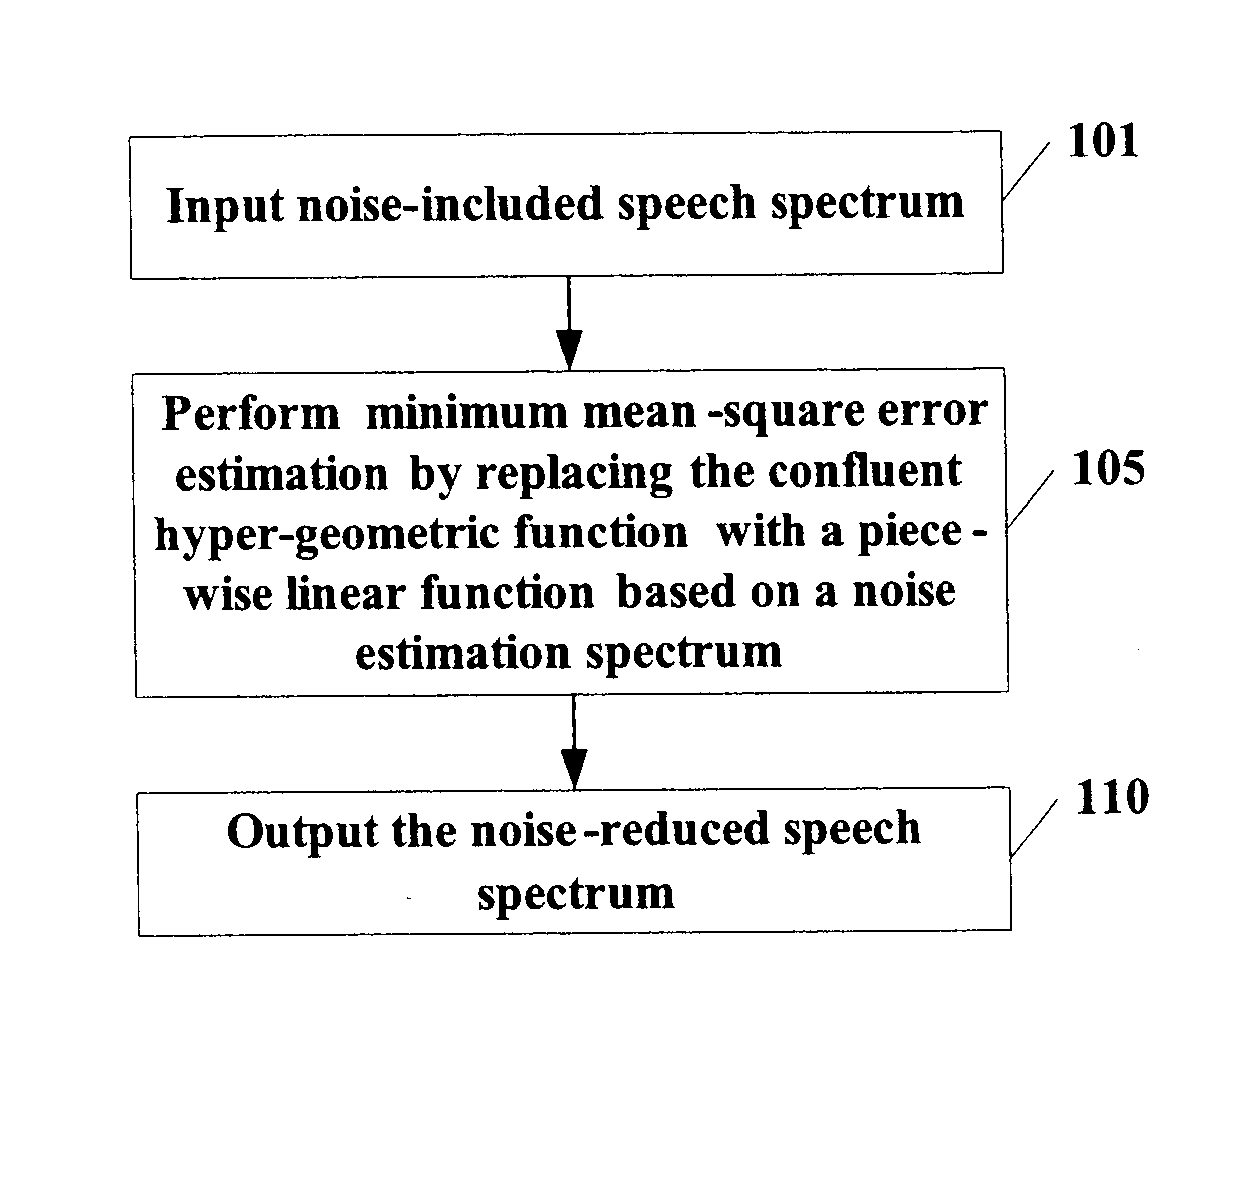 Method and apparatus for noise suppression, smoothing a speech spectrum, extracting speech features, speech recognition and training a speech model